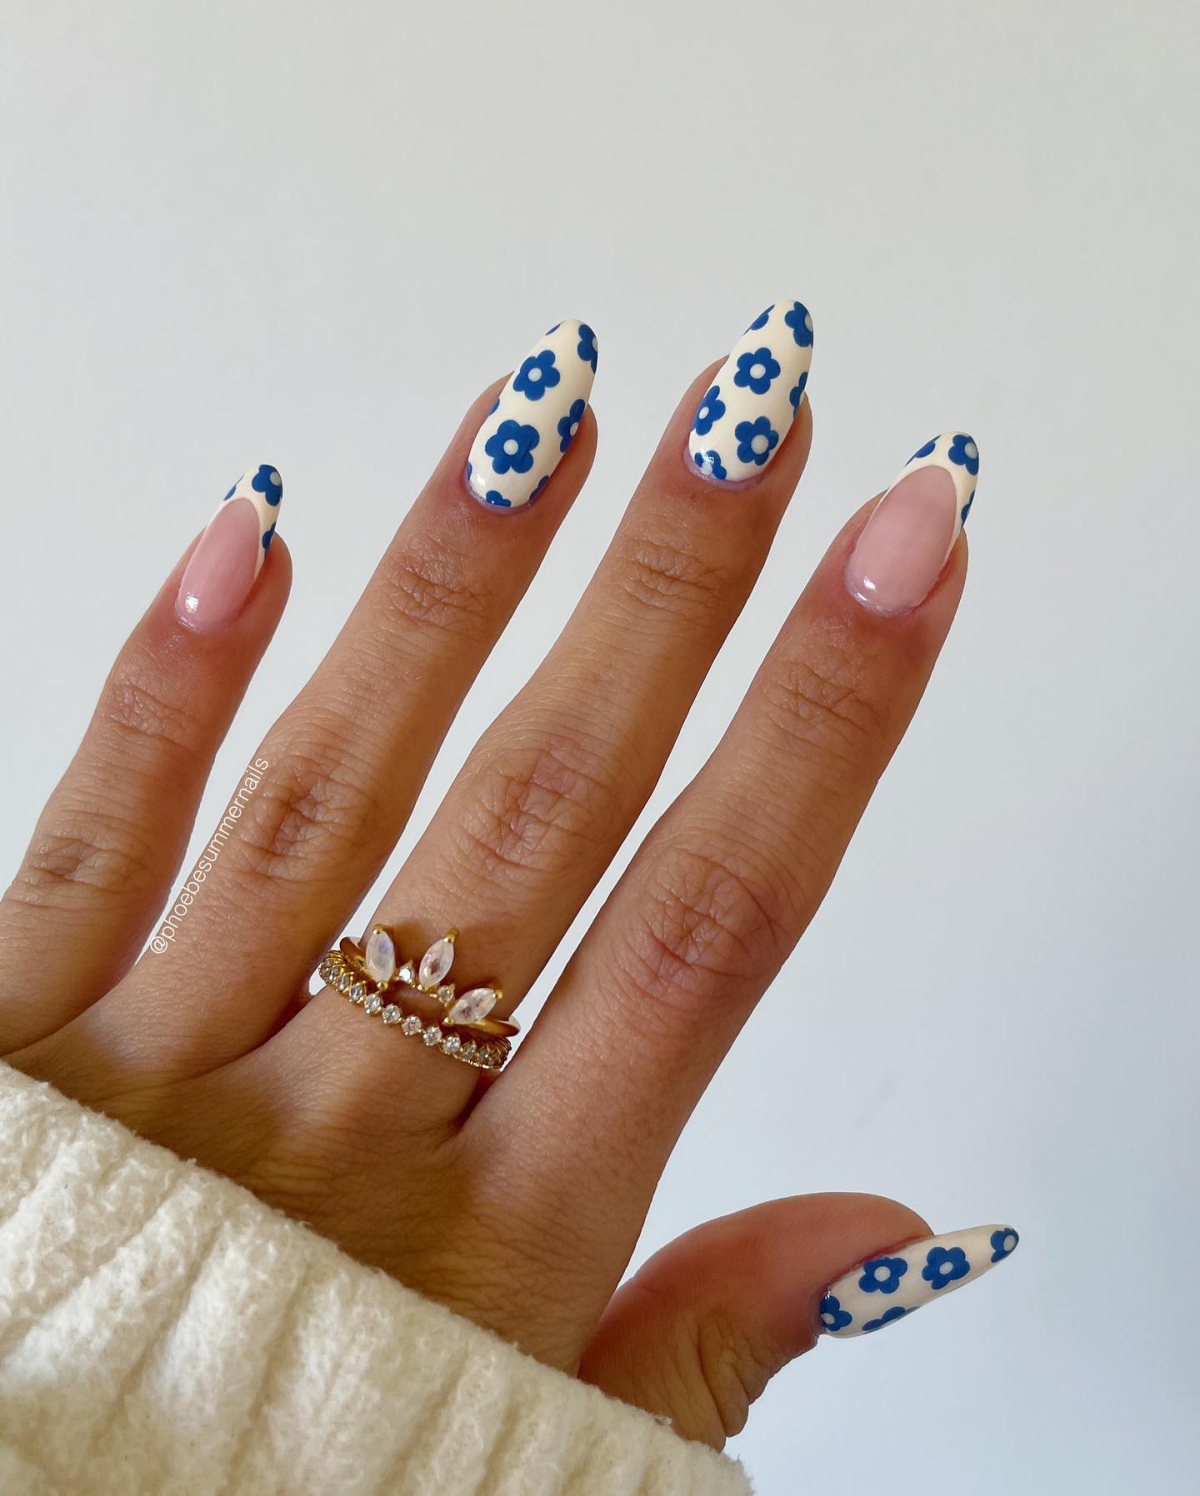 white and blue flowers on nails